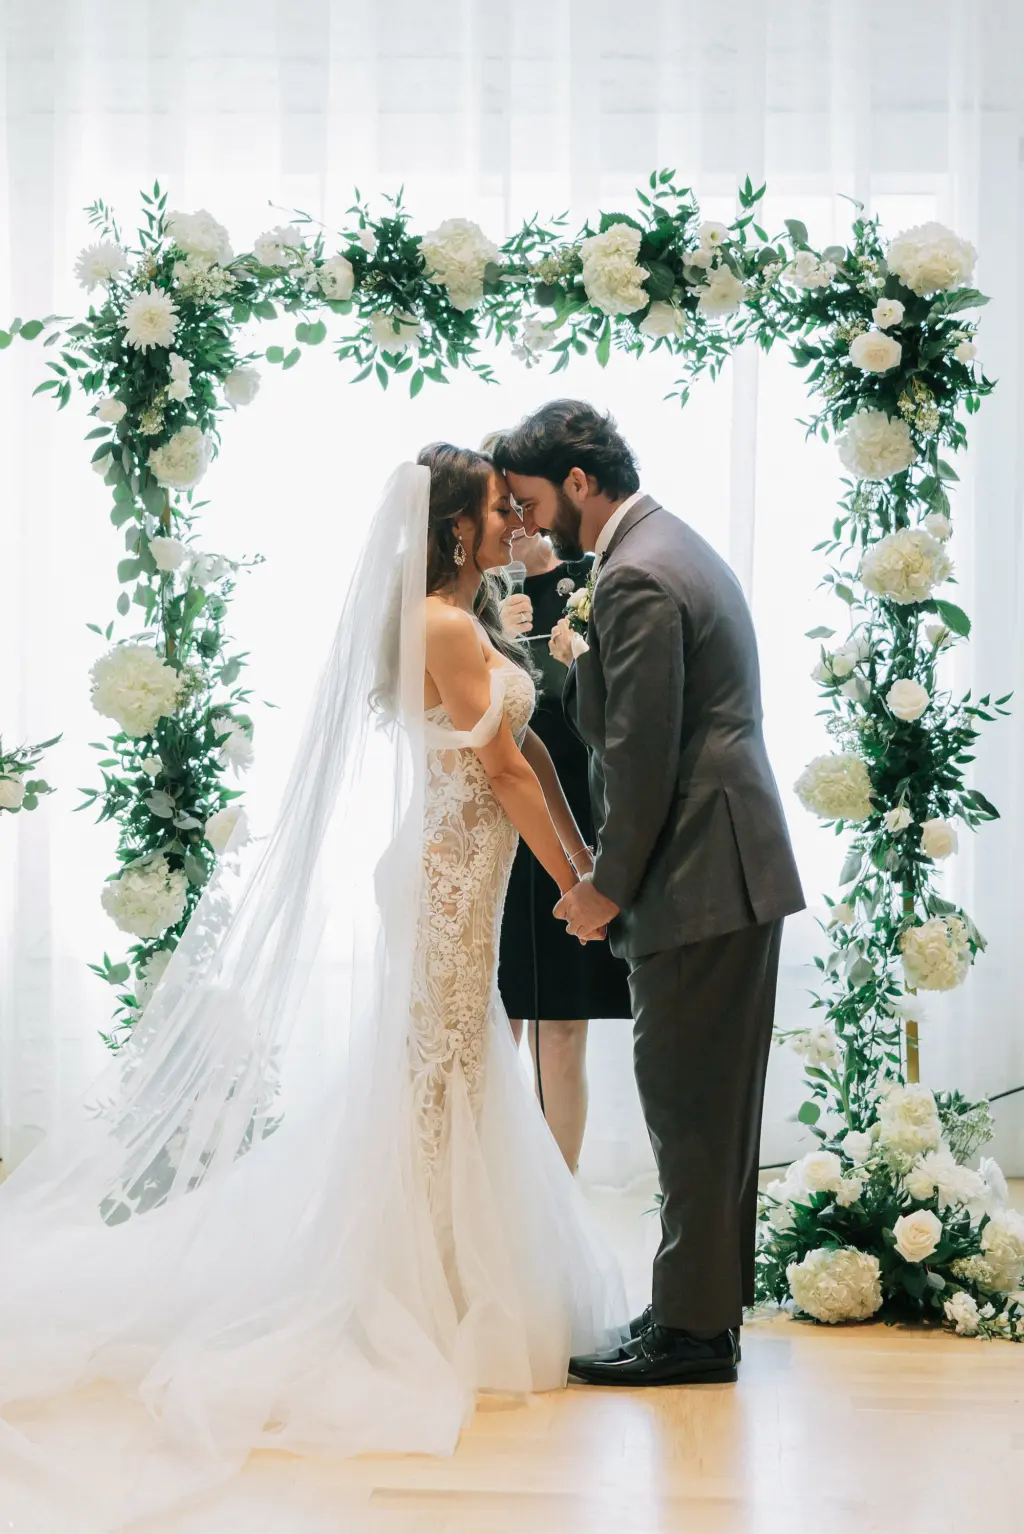 Bride and Groom Exchange Vows in Romantic White Gold and Greenery Wedding Ceremony | Planner EventFull Weddings | Venue Hotel Haya